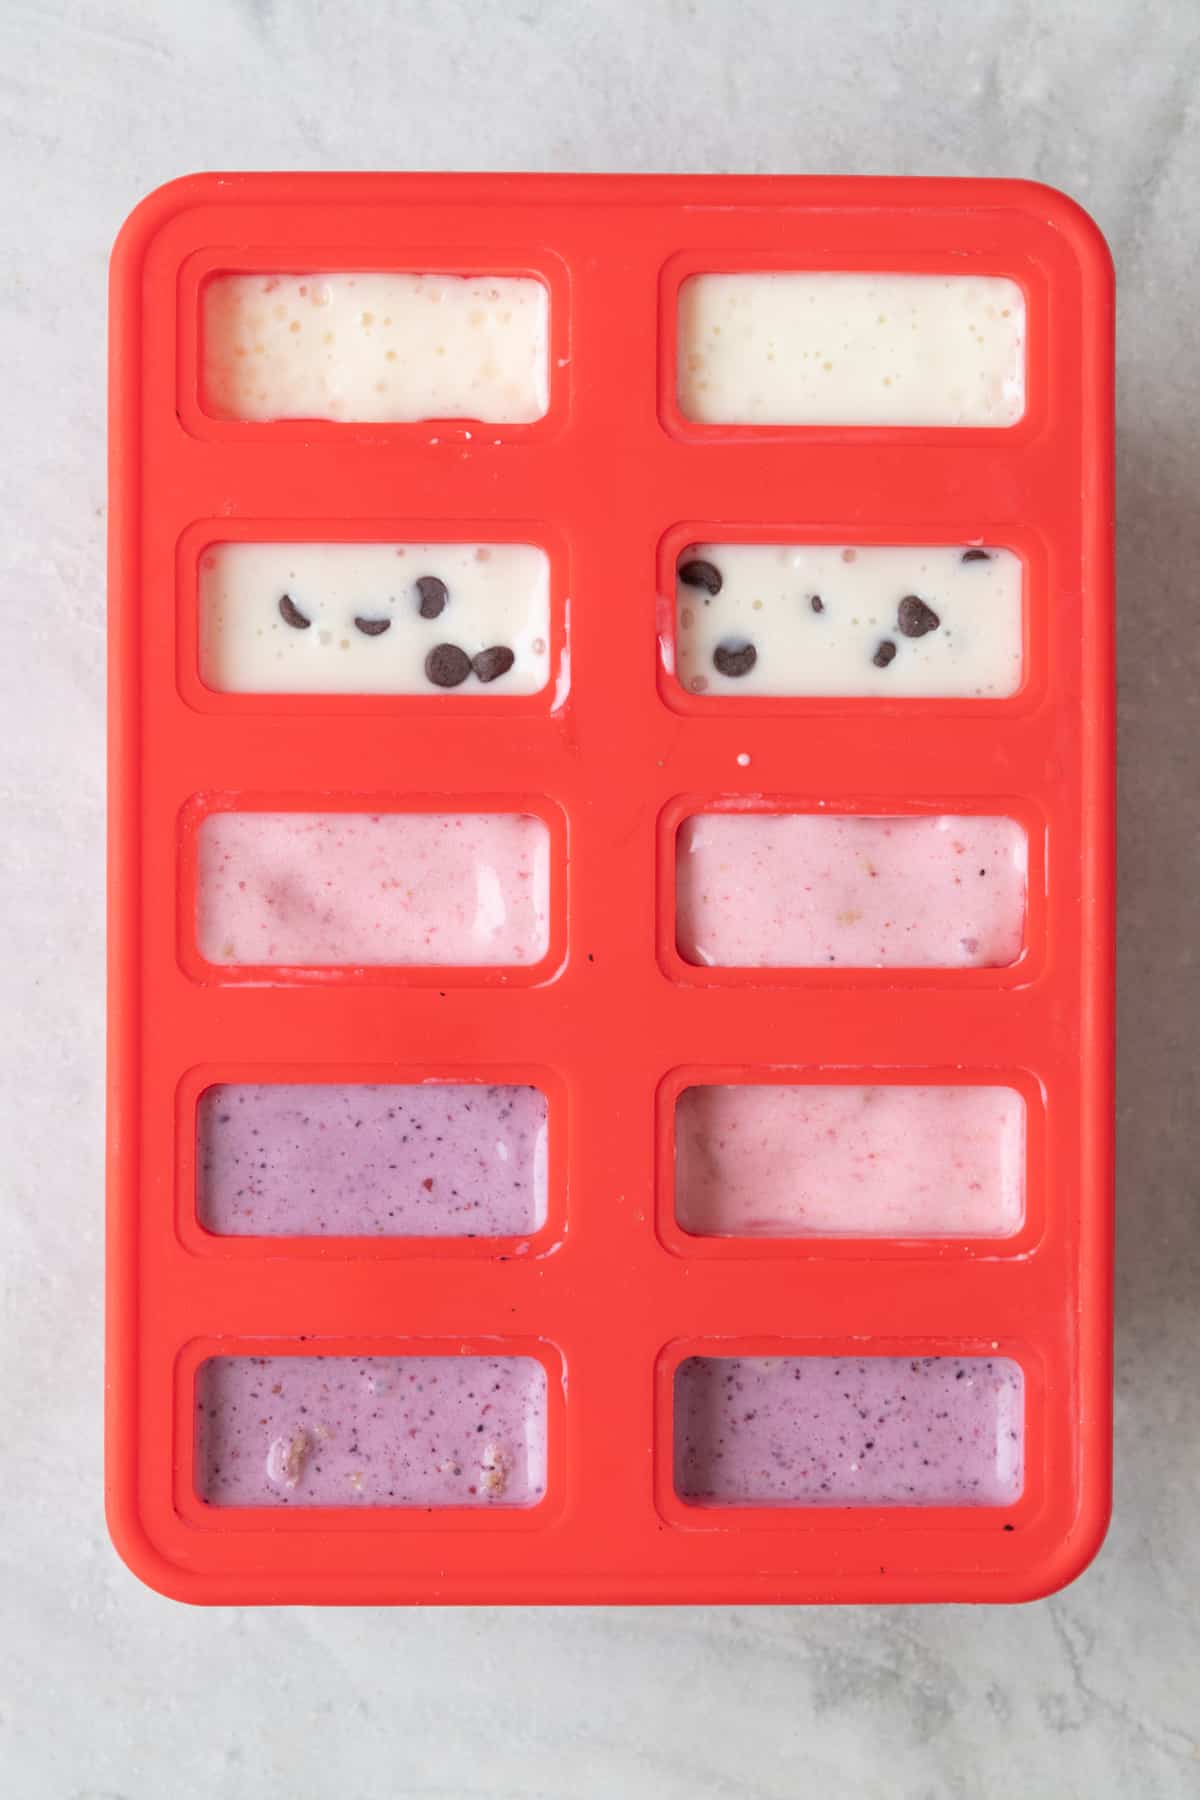 Four different flavored cottage cheese ice cream mixture in a silicone popsicle mold.